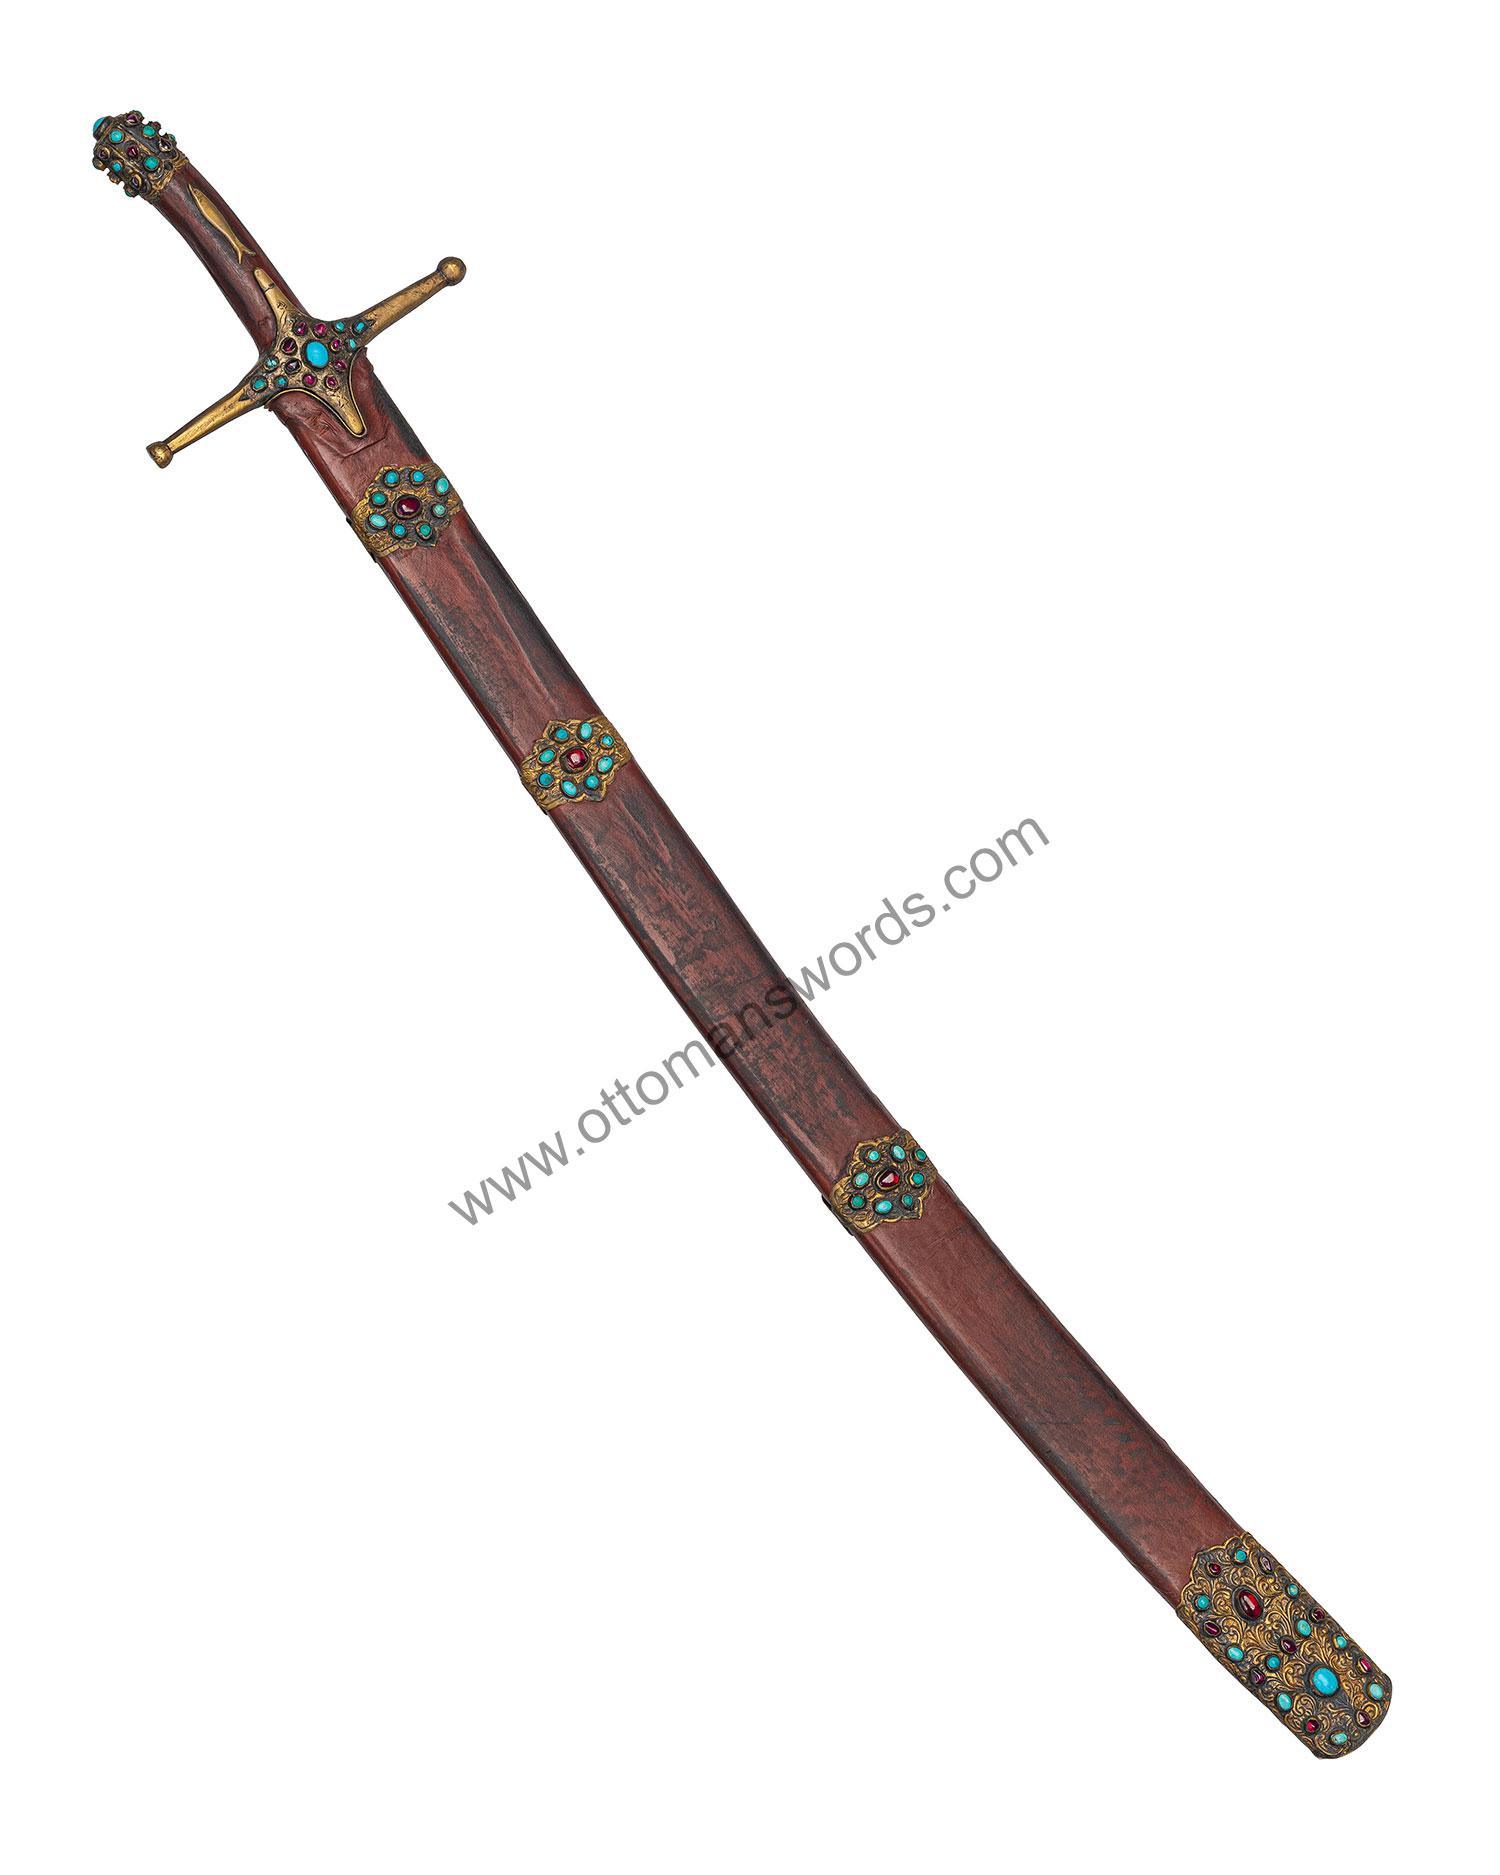 Sword of Suleiman the Magnificent (7)